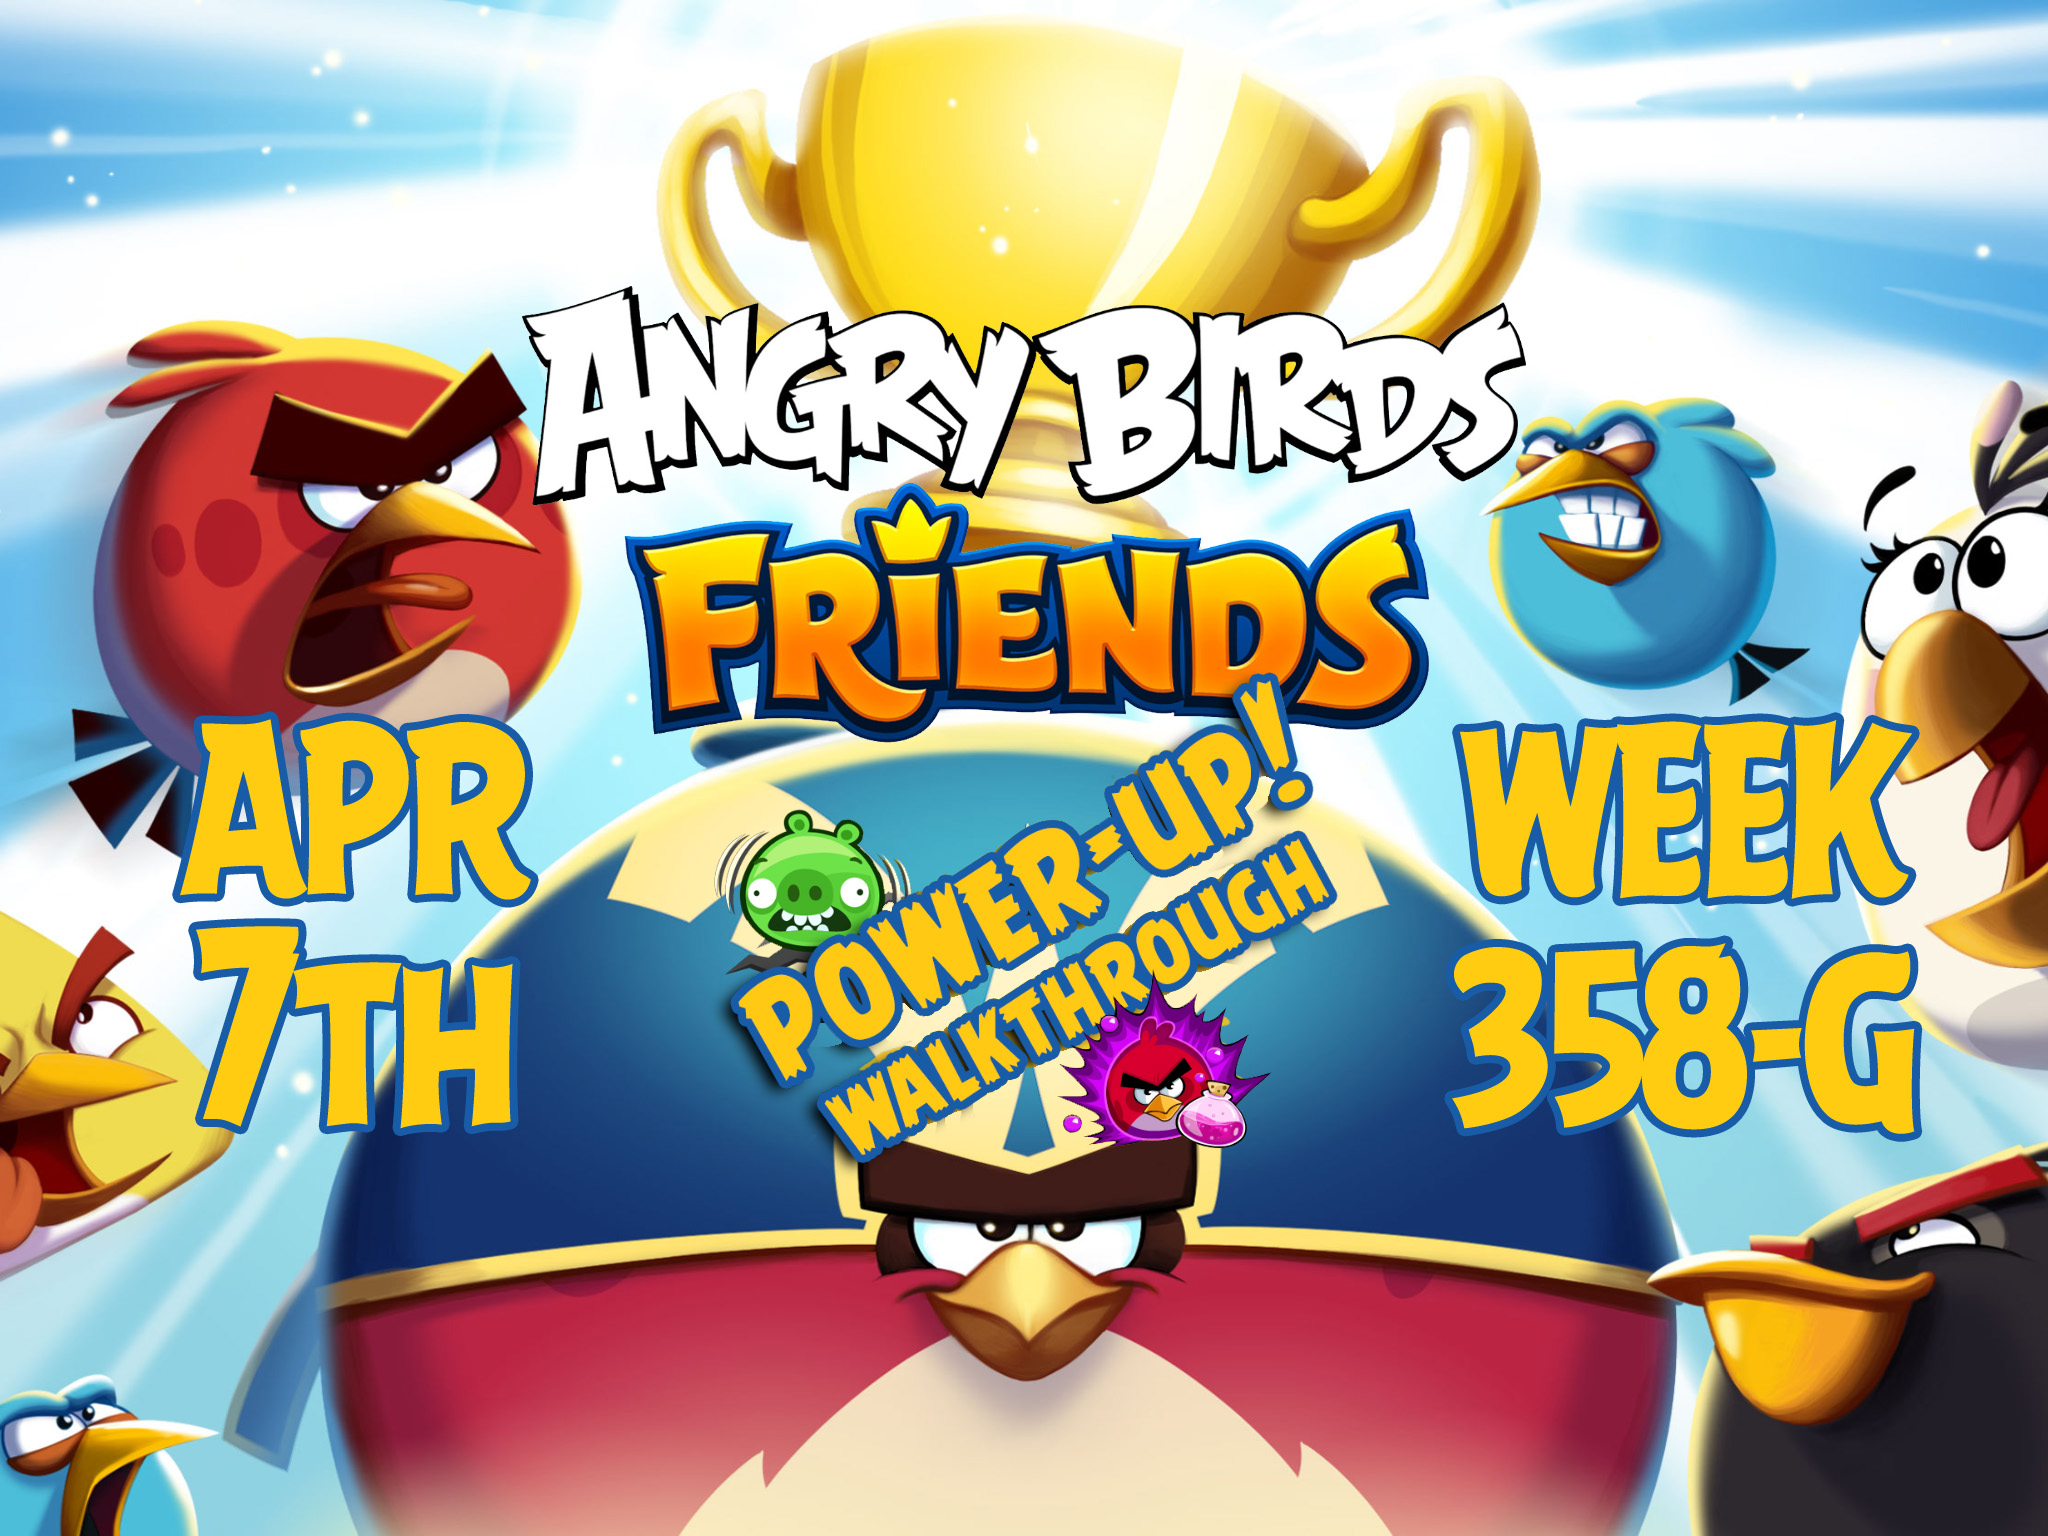 Angry-Birds-Friends-Tournament-Week-358-G-Feature-Image-PU